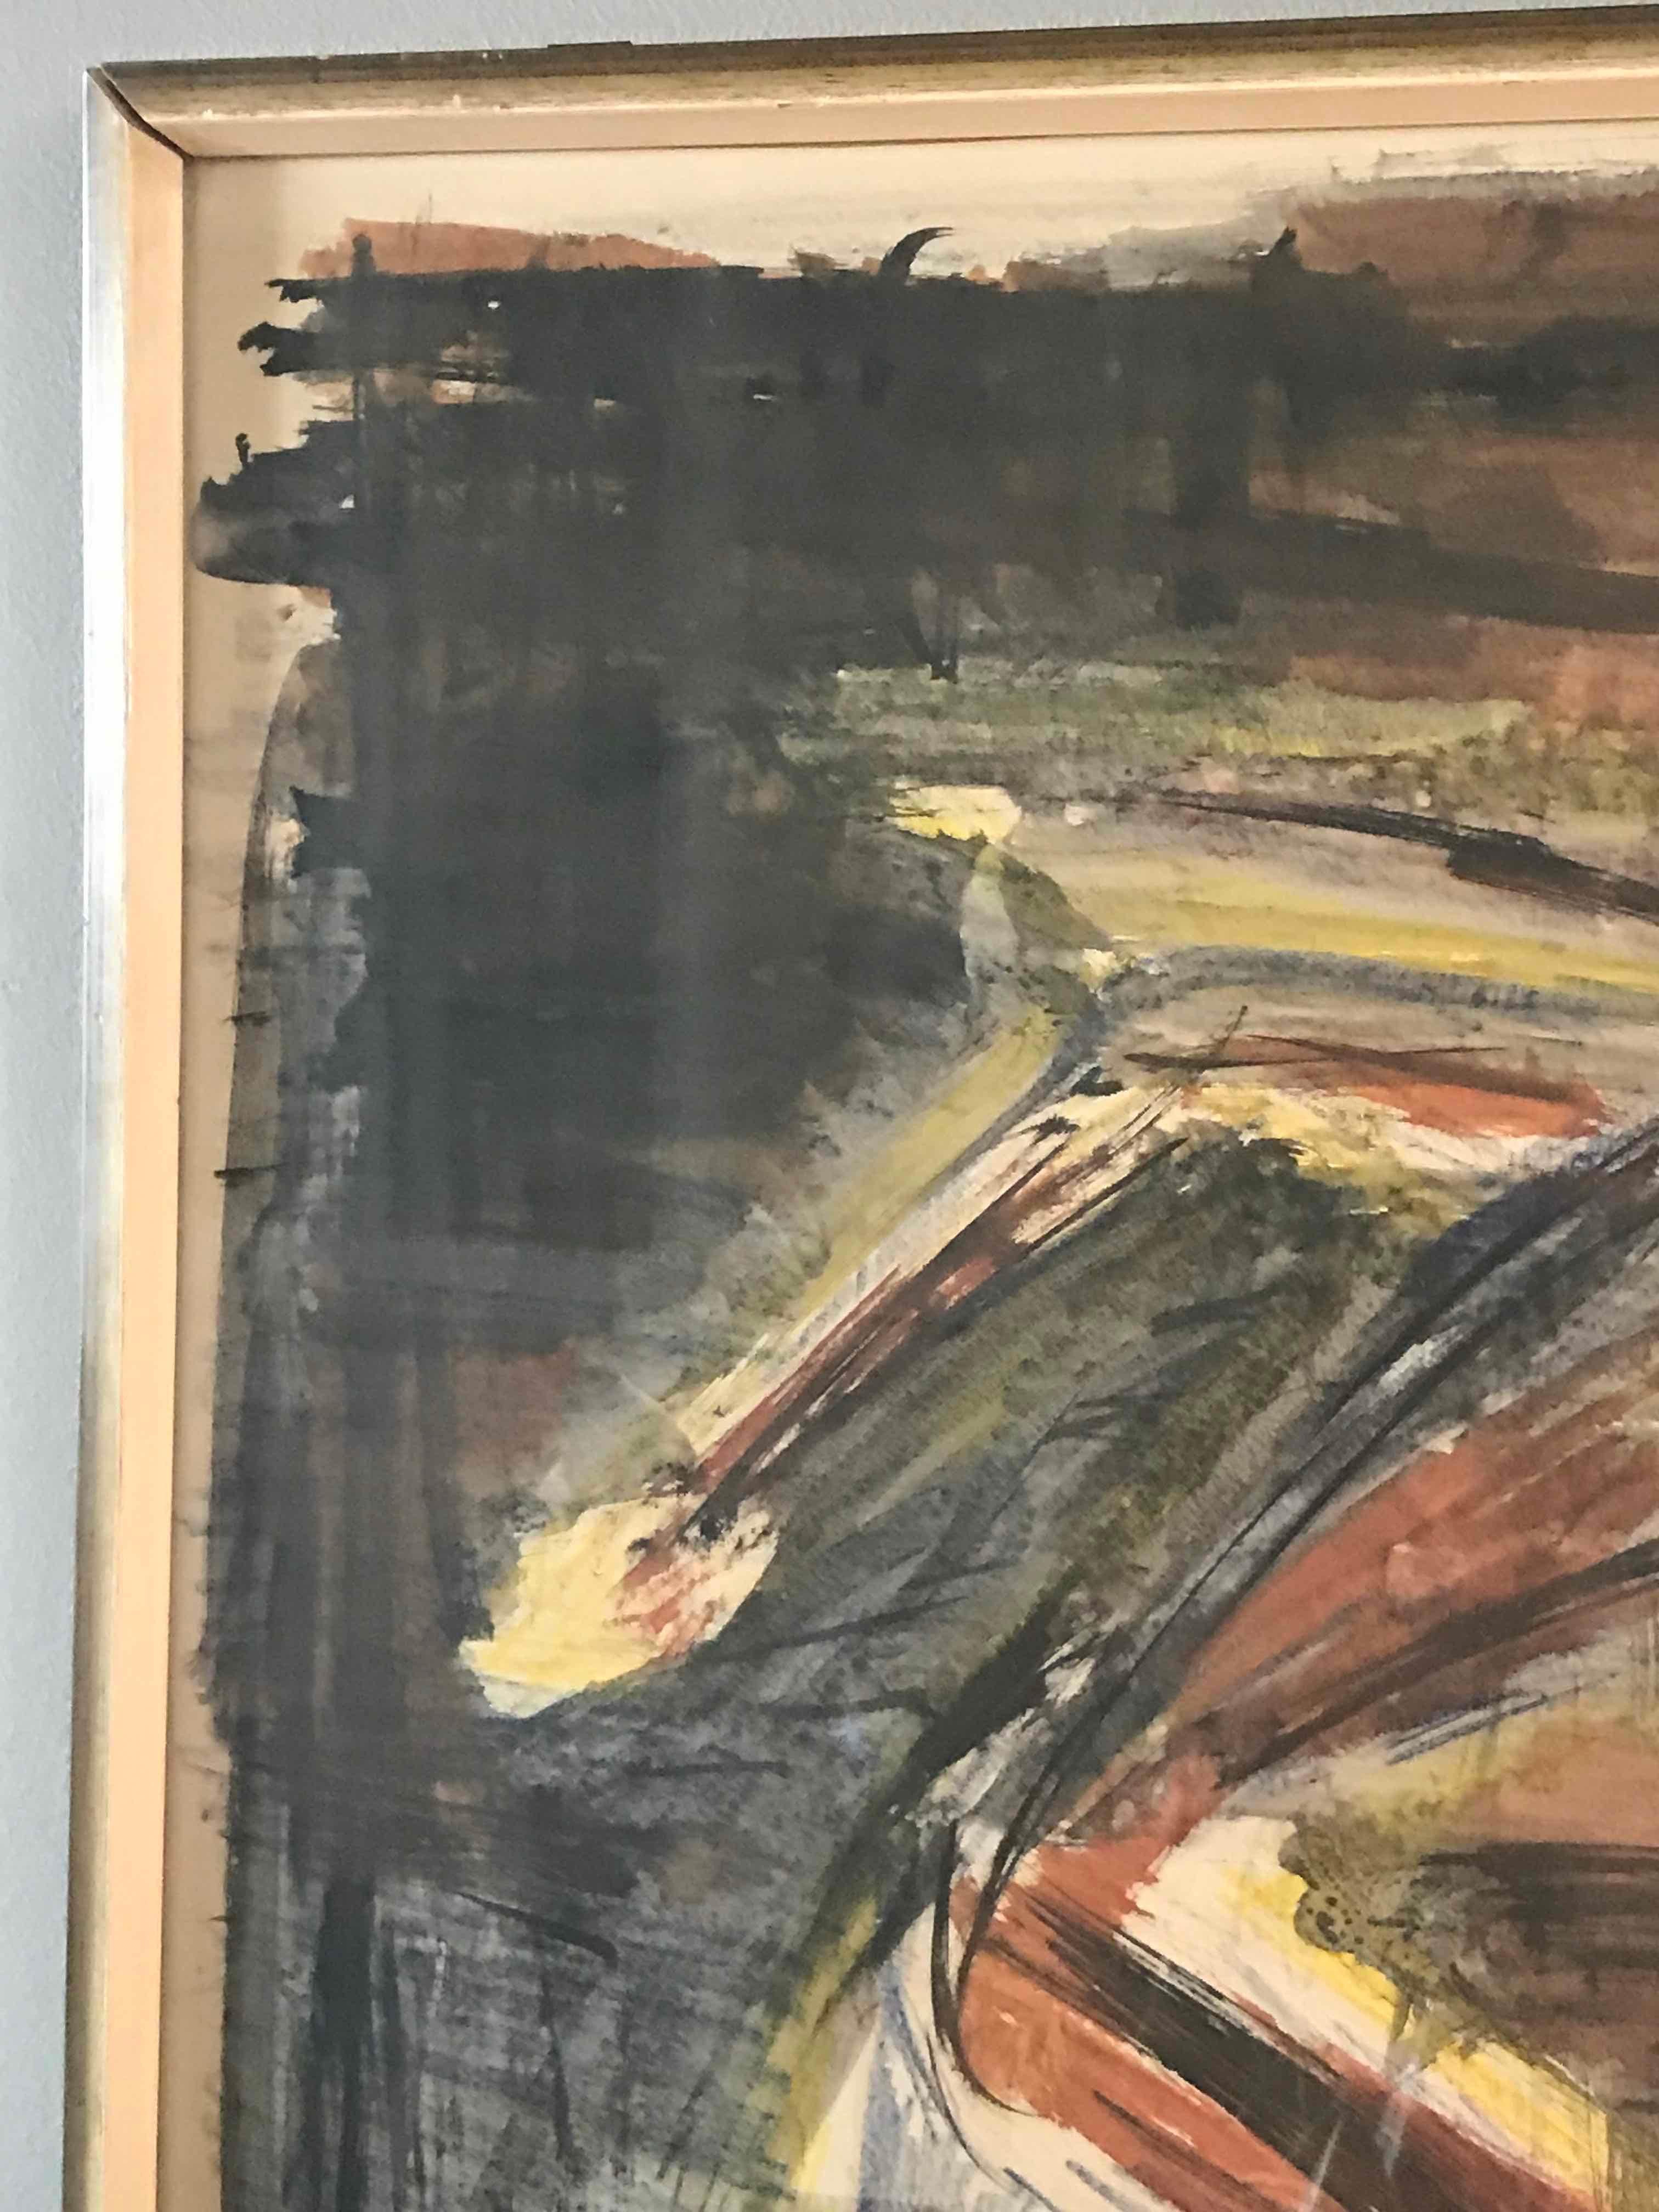 Dynamic German Abstract Expressionist painting. Oil pastel and watercolors depict of two dancing genderless figures. Oak browns, burnt siennas, umbers, and ochres gives this joyous piece an earthen quality.

Germany, circa 1940

Dimensions: 30.5W x